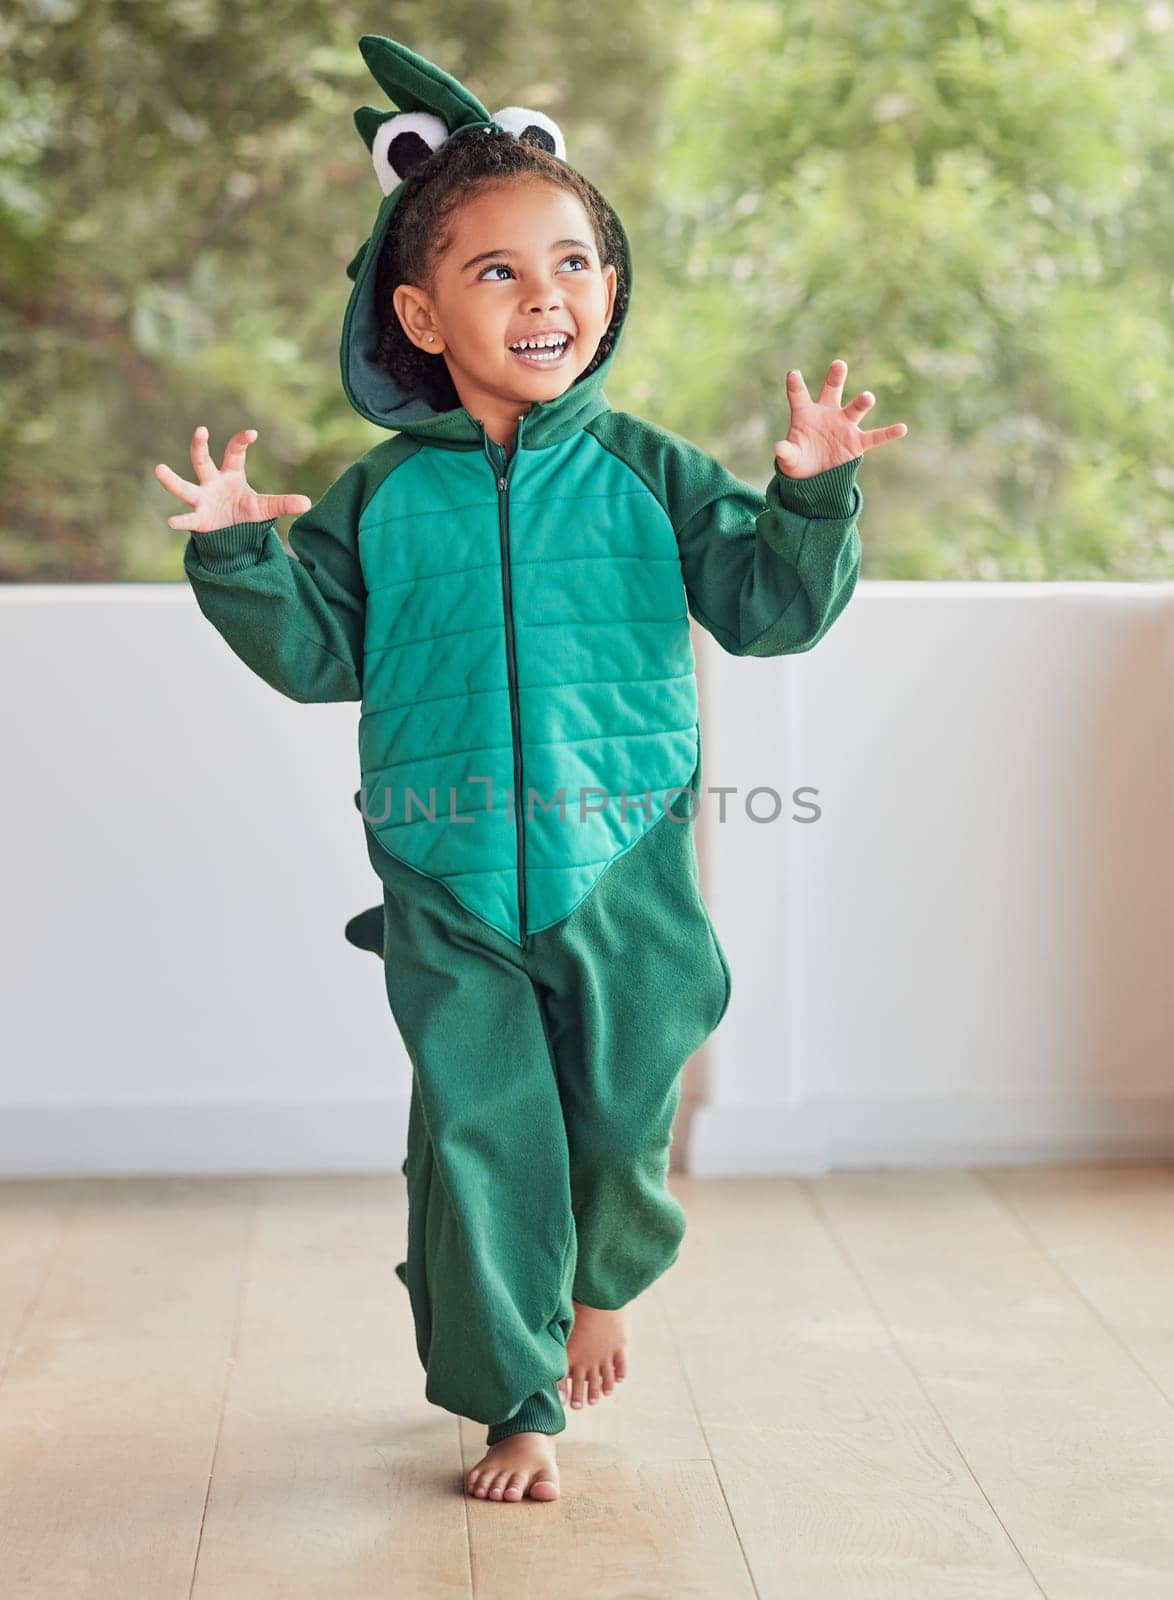 Child, smile and excited in halloween dinosaur costume at home playing role and having fun at party. Happy kid being playful with fantasy character in living room mimic animal actions ready to roar